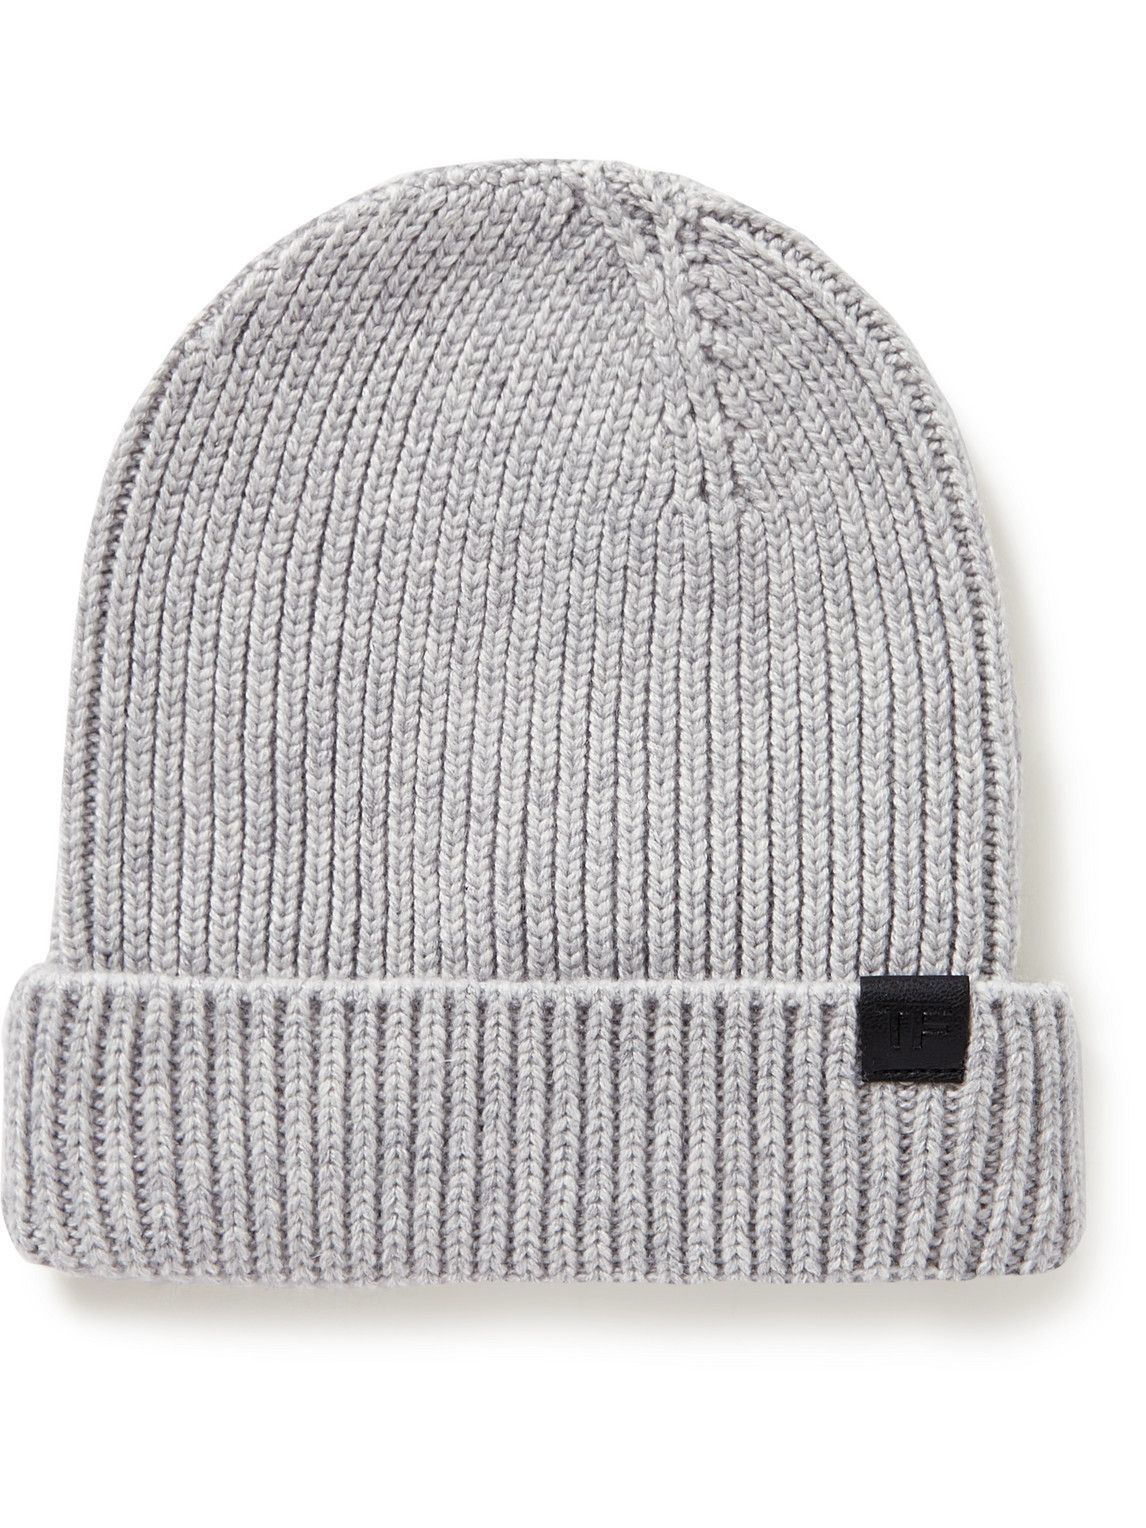 TOM FORD - Leather-Trimmed Ribbed Cashmere Beanie - Gray TOM FORD